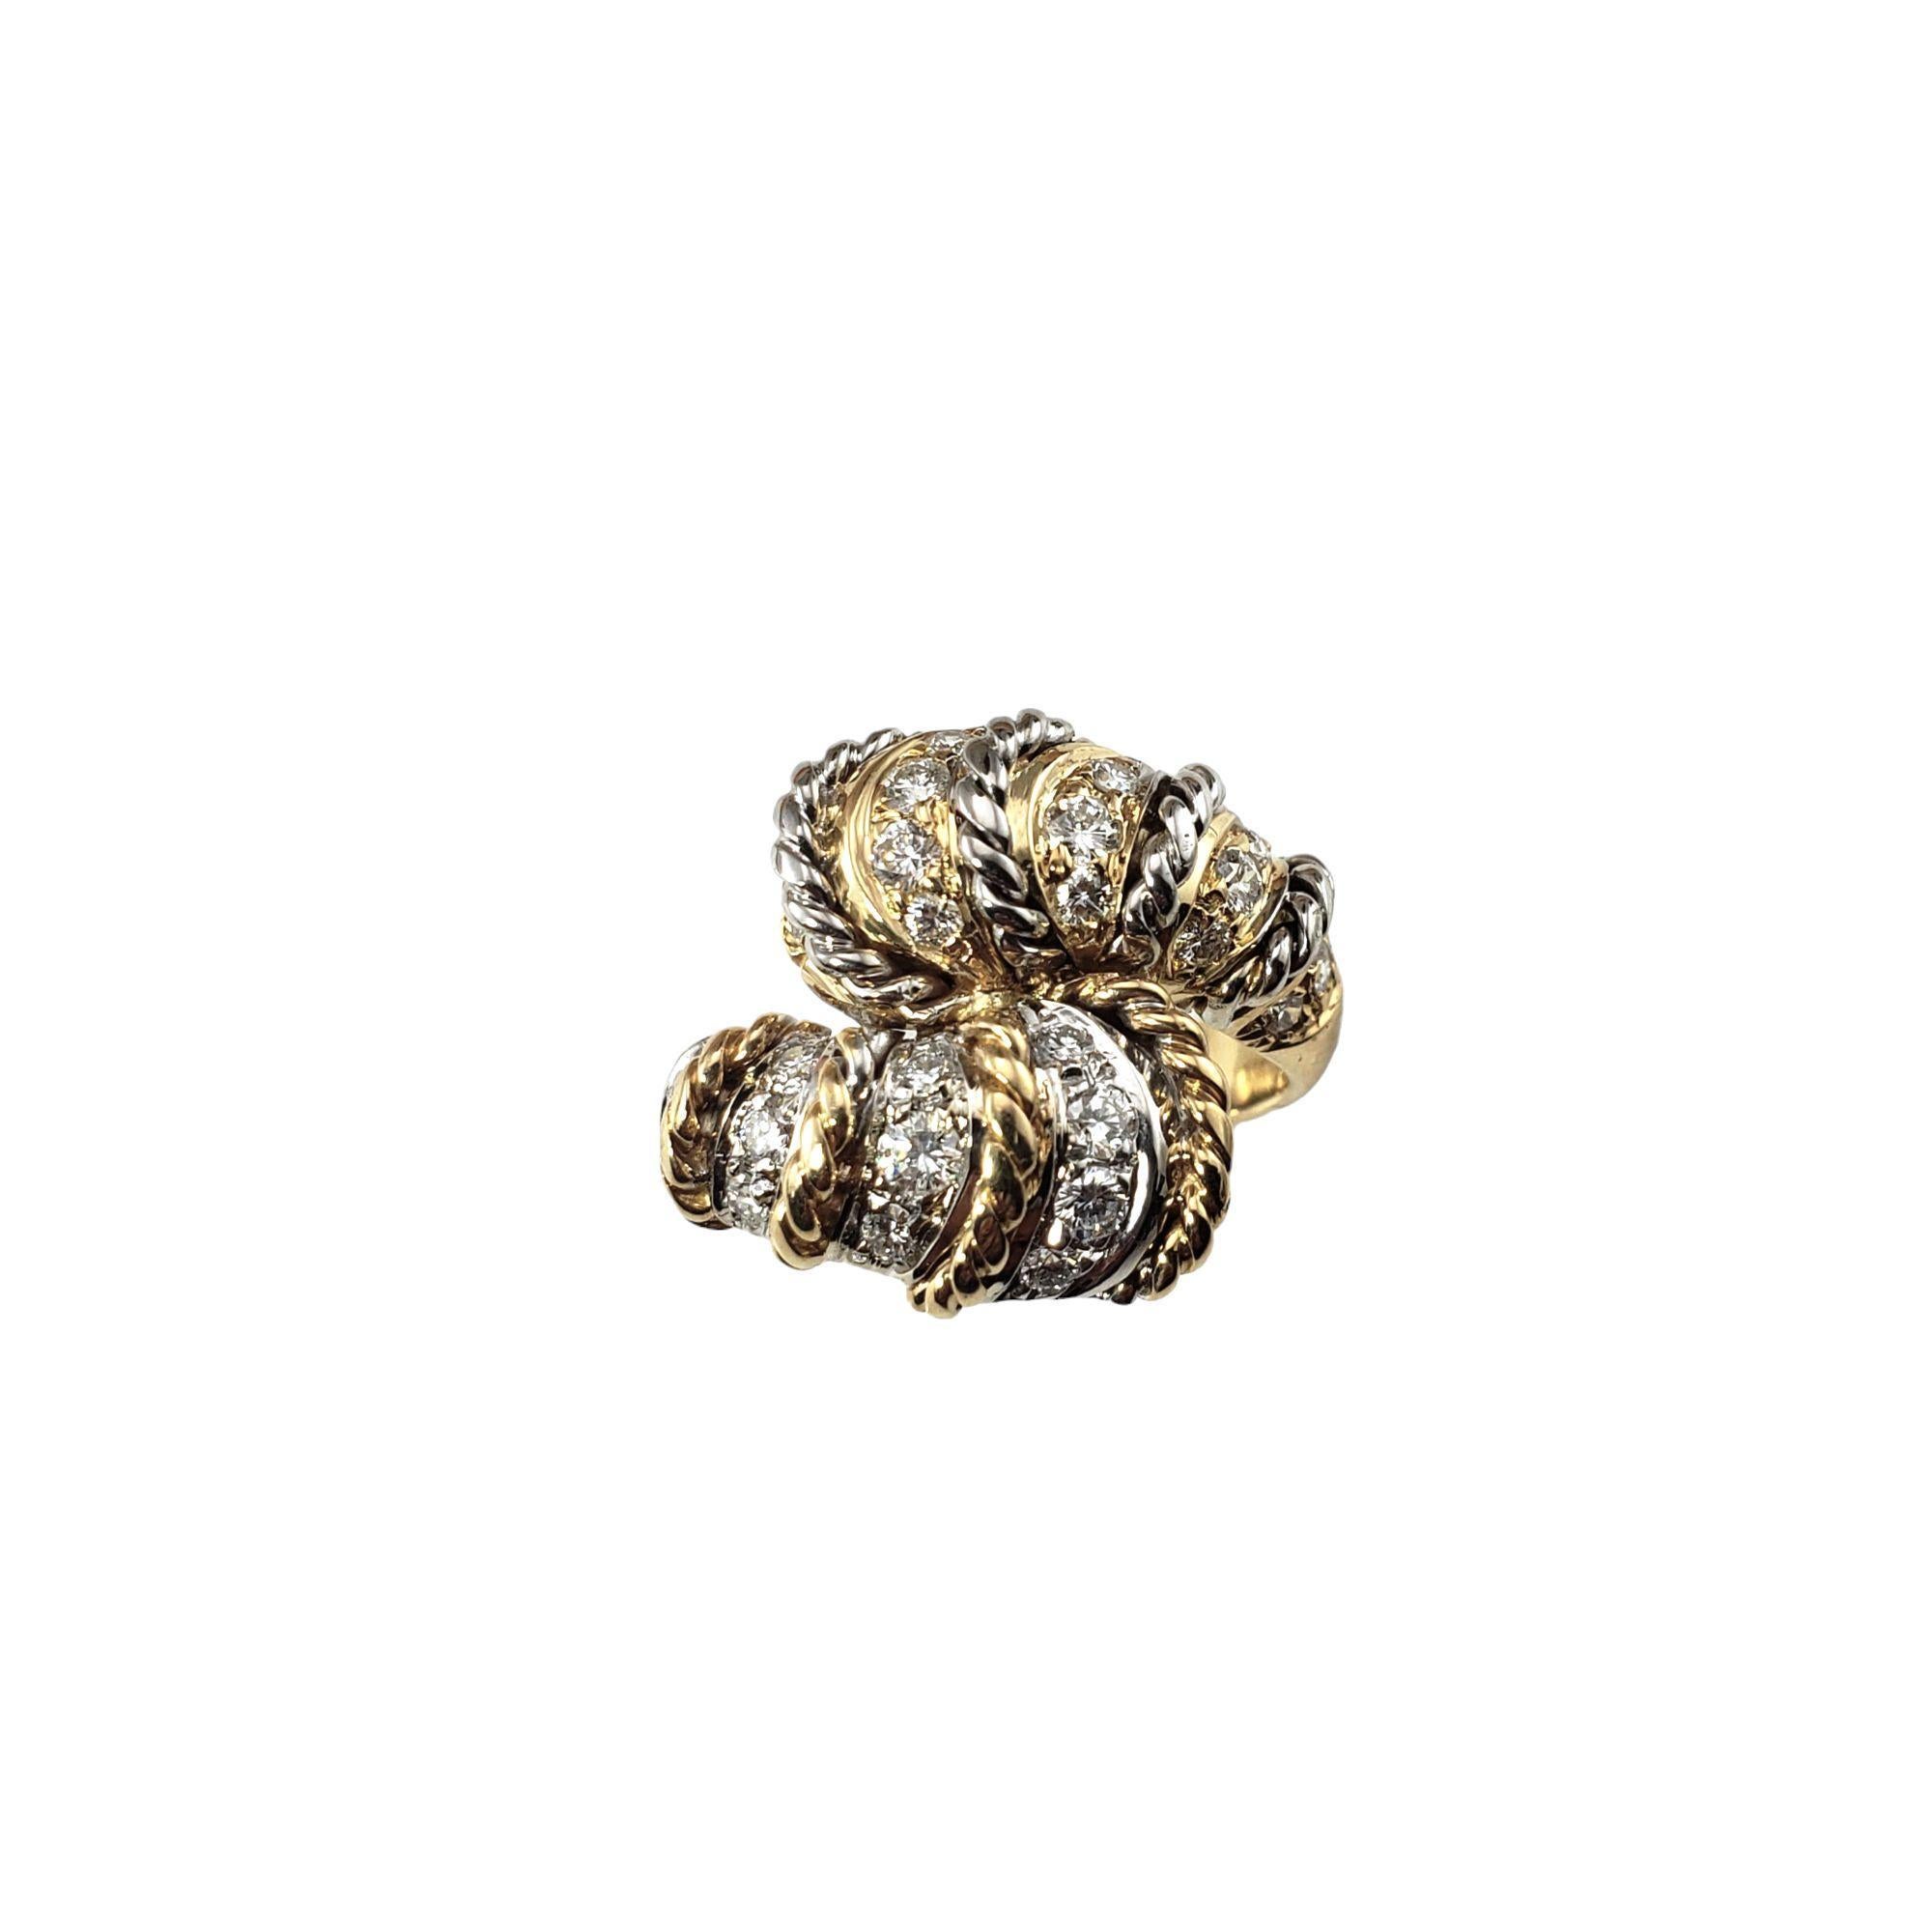 14 Karat Two-Tone Gold and Diamond Ring Size 7-

This sparkling ring features 27 round brilliant cut diamonds set in beautifully detailed 14K yellow and white gold.

Approximate total diamond weight: .80 ct.

Diamond color: G

Diamond